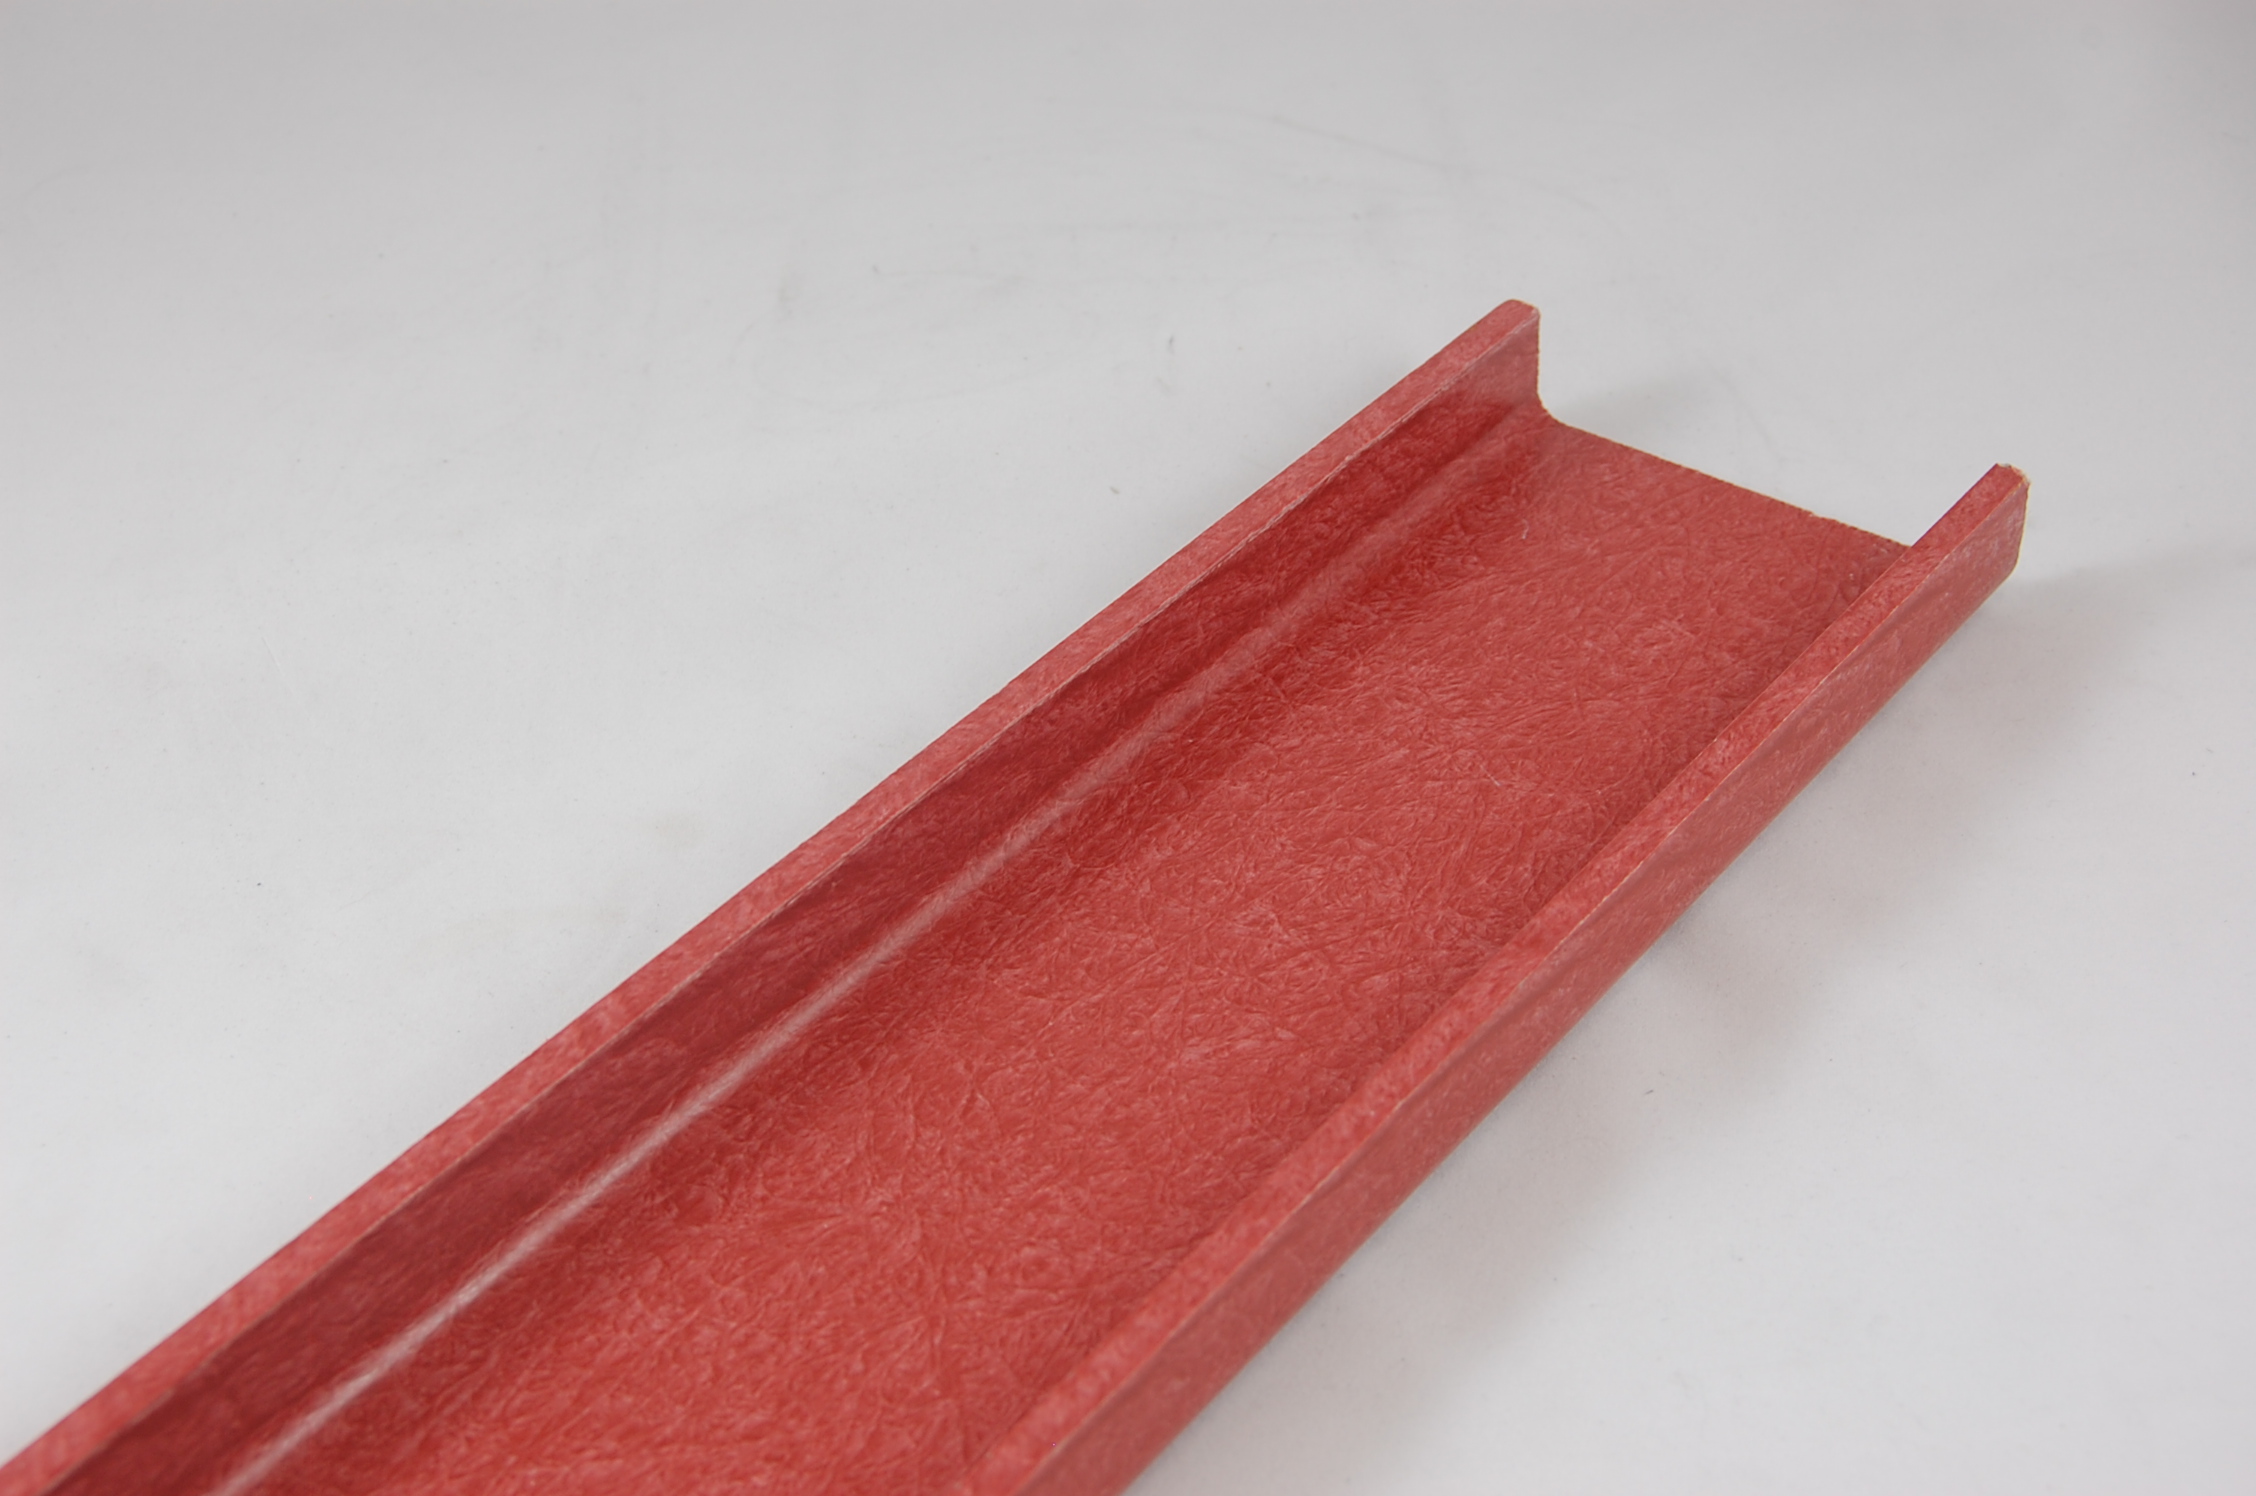 3-9/16"W x 2-9/16" Leg x 3/16" thick GLASROD® Grade 1130 Fiberglass-Reinforced Polyester Laminate Channel, red,  120"L channel